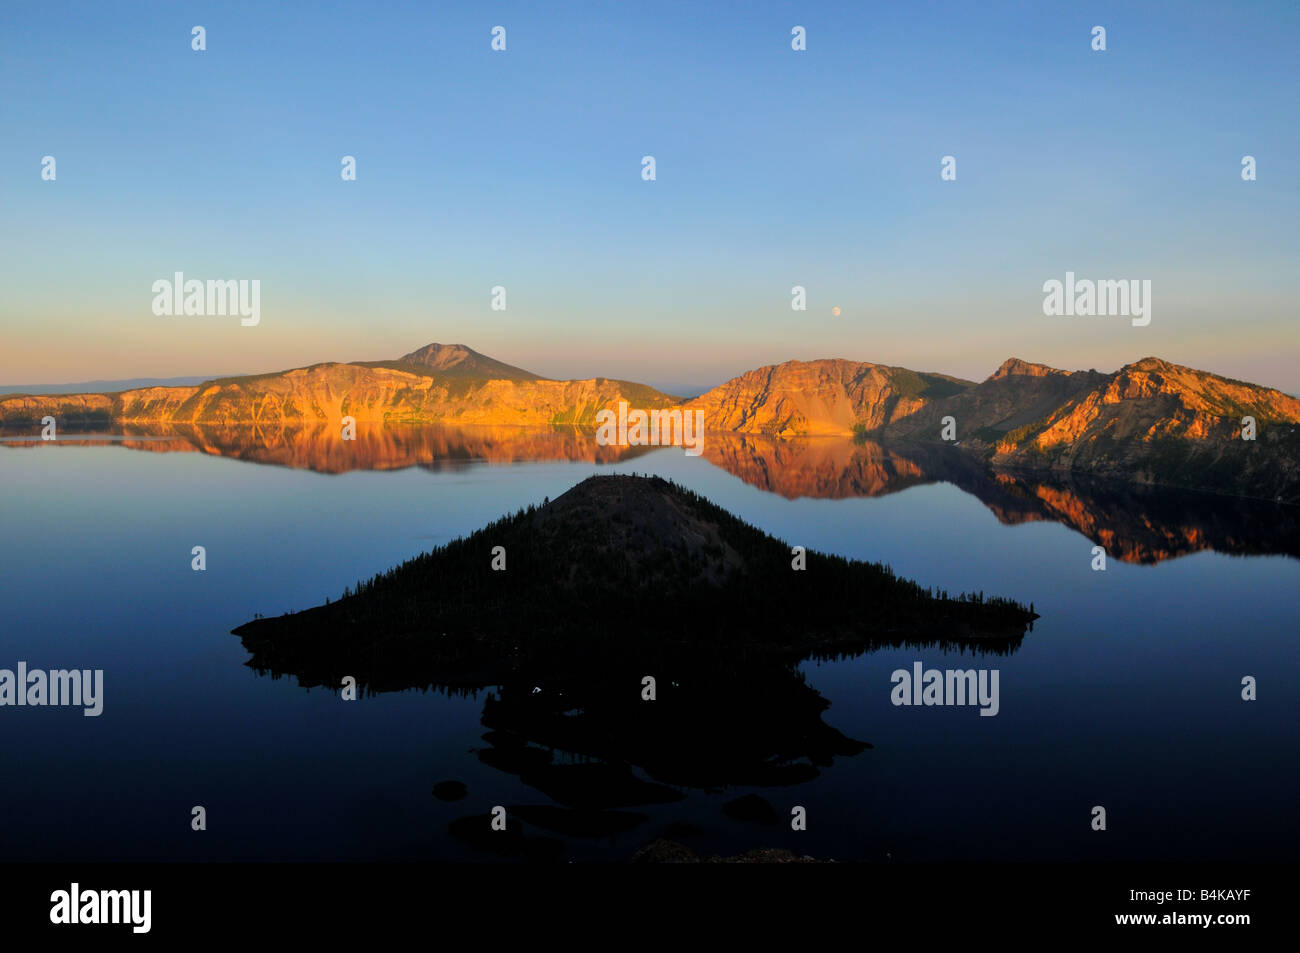 The Crater Lake and the Wizard Island at sunset. The Crater Lake National Park, Oregon, USA. Stock Photo